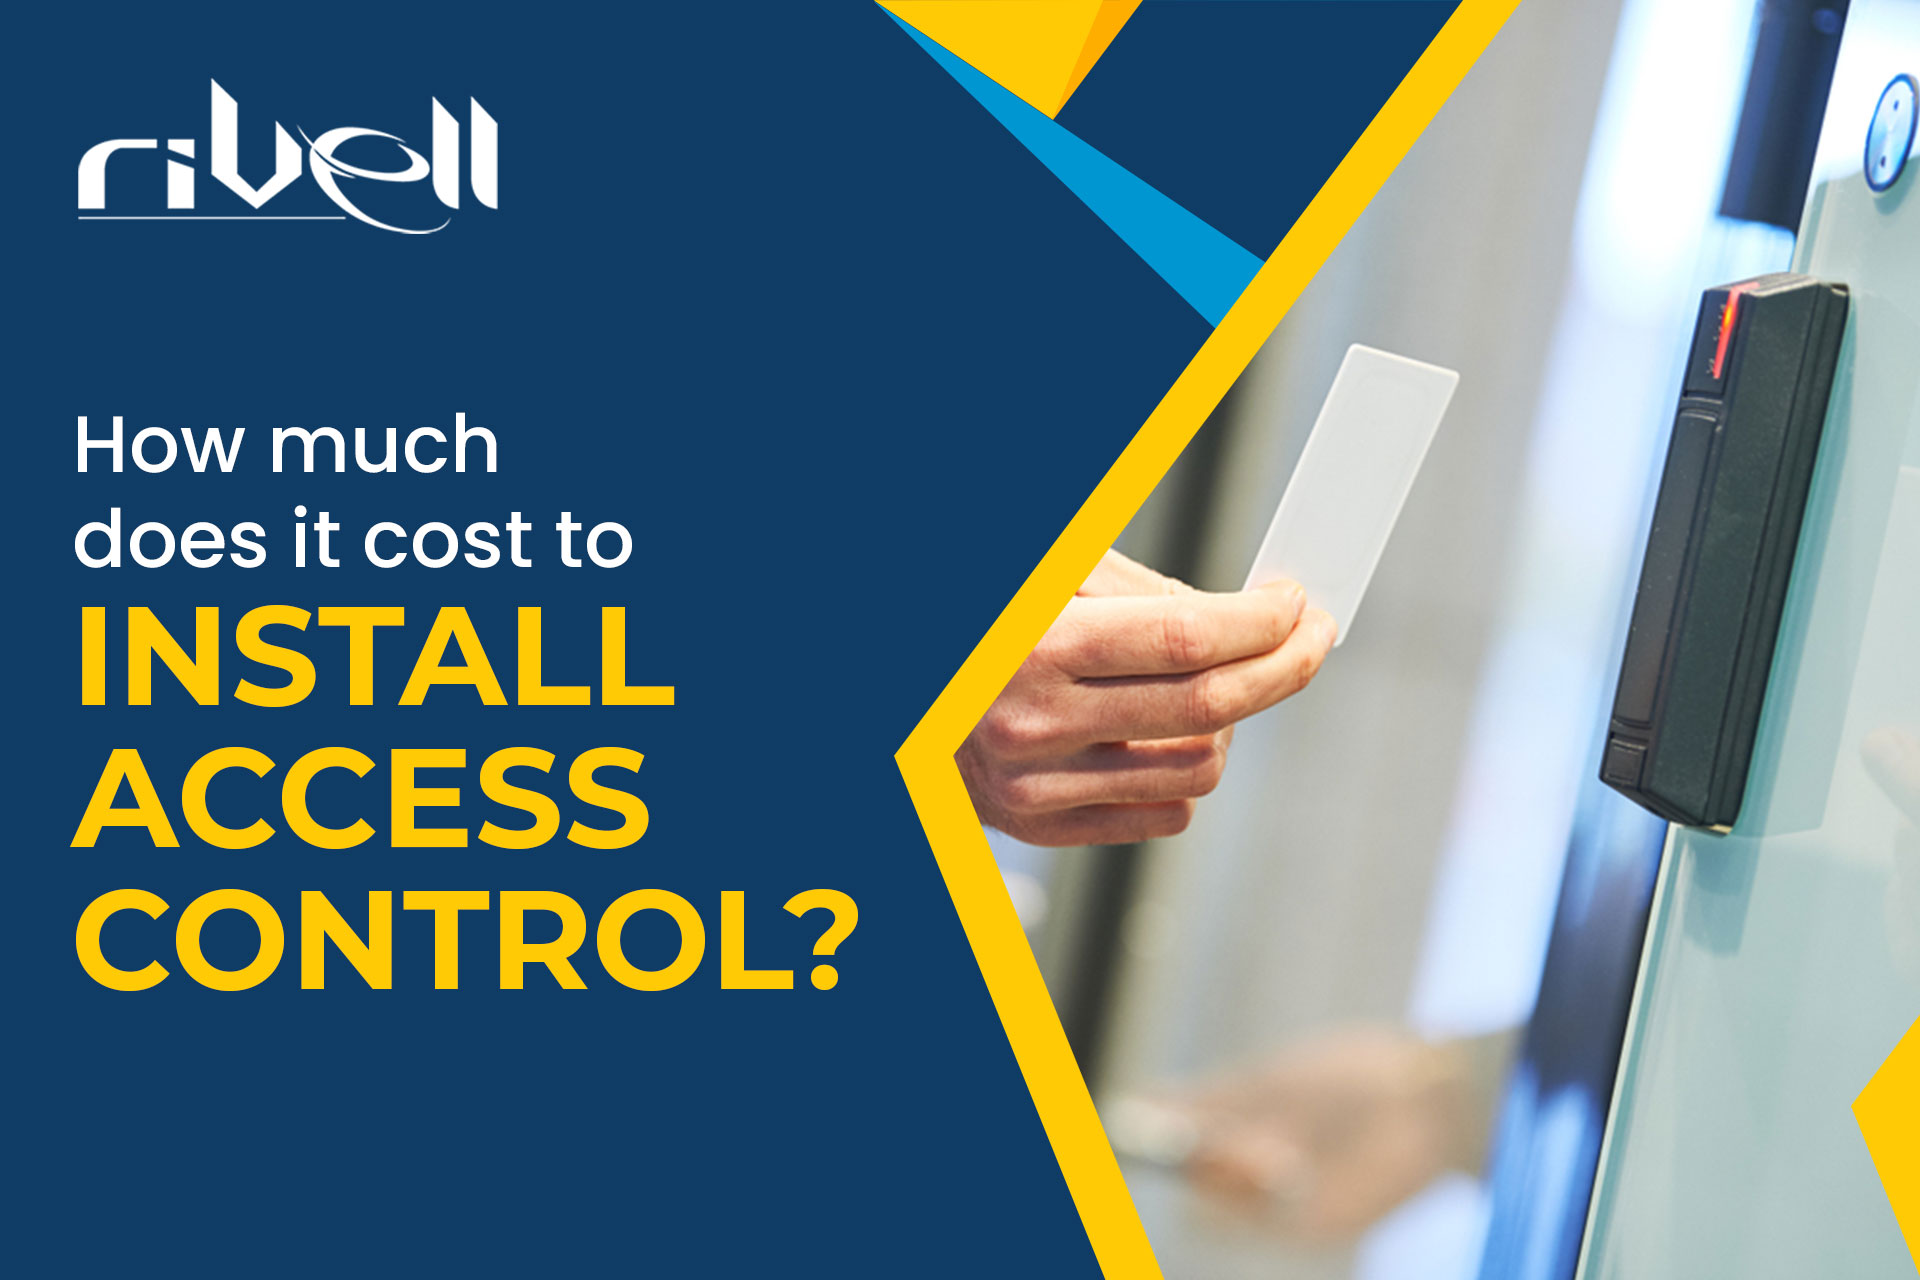 How much does it cost to install access control